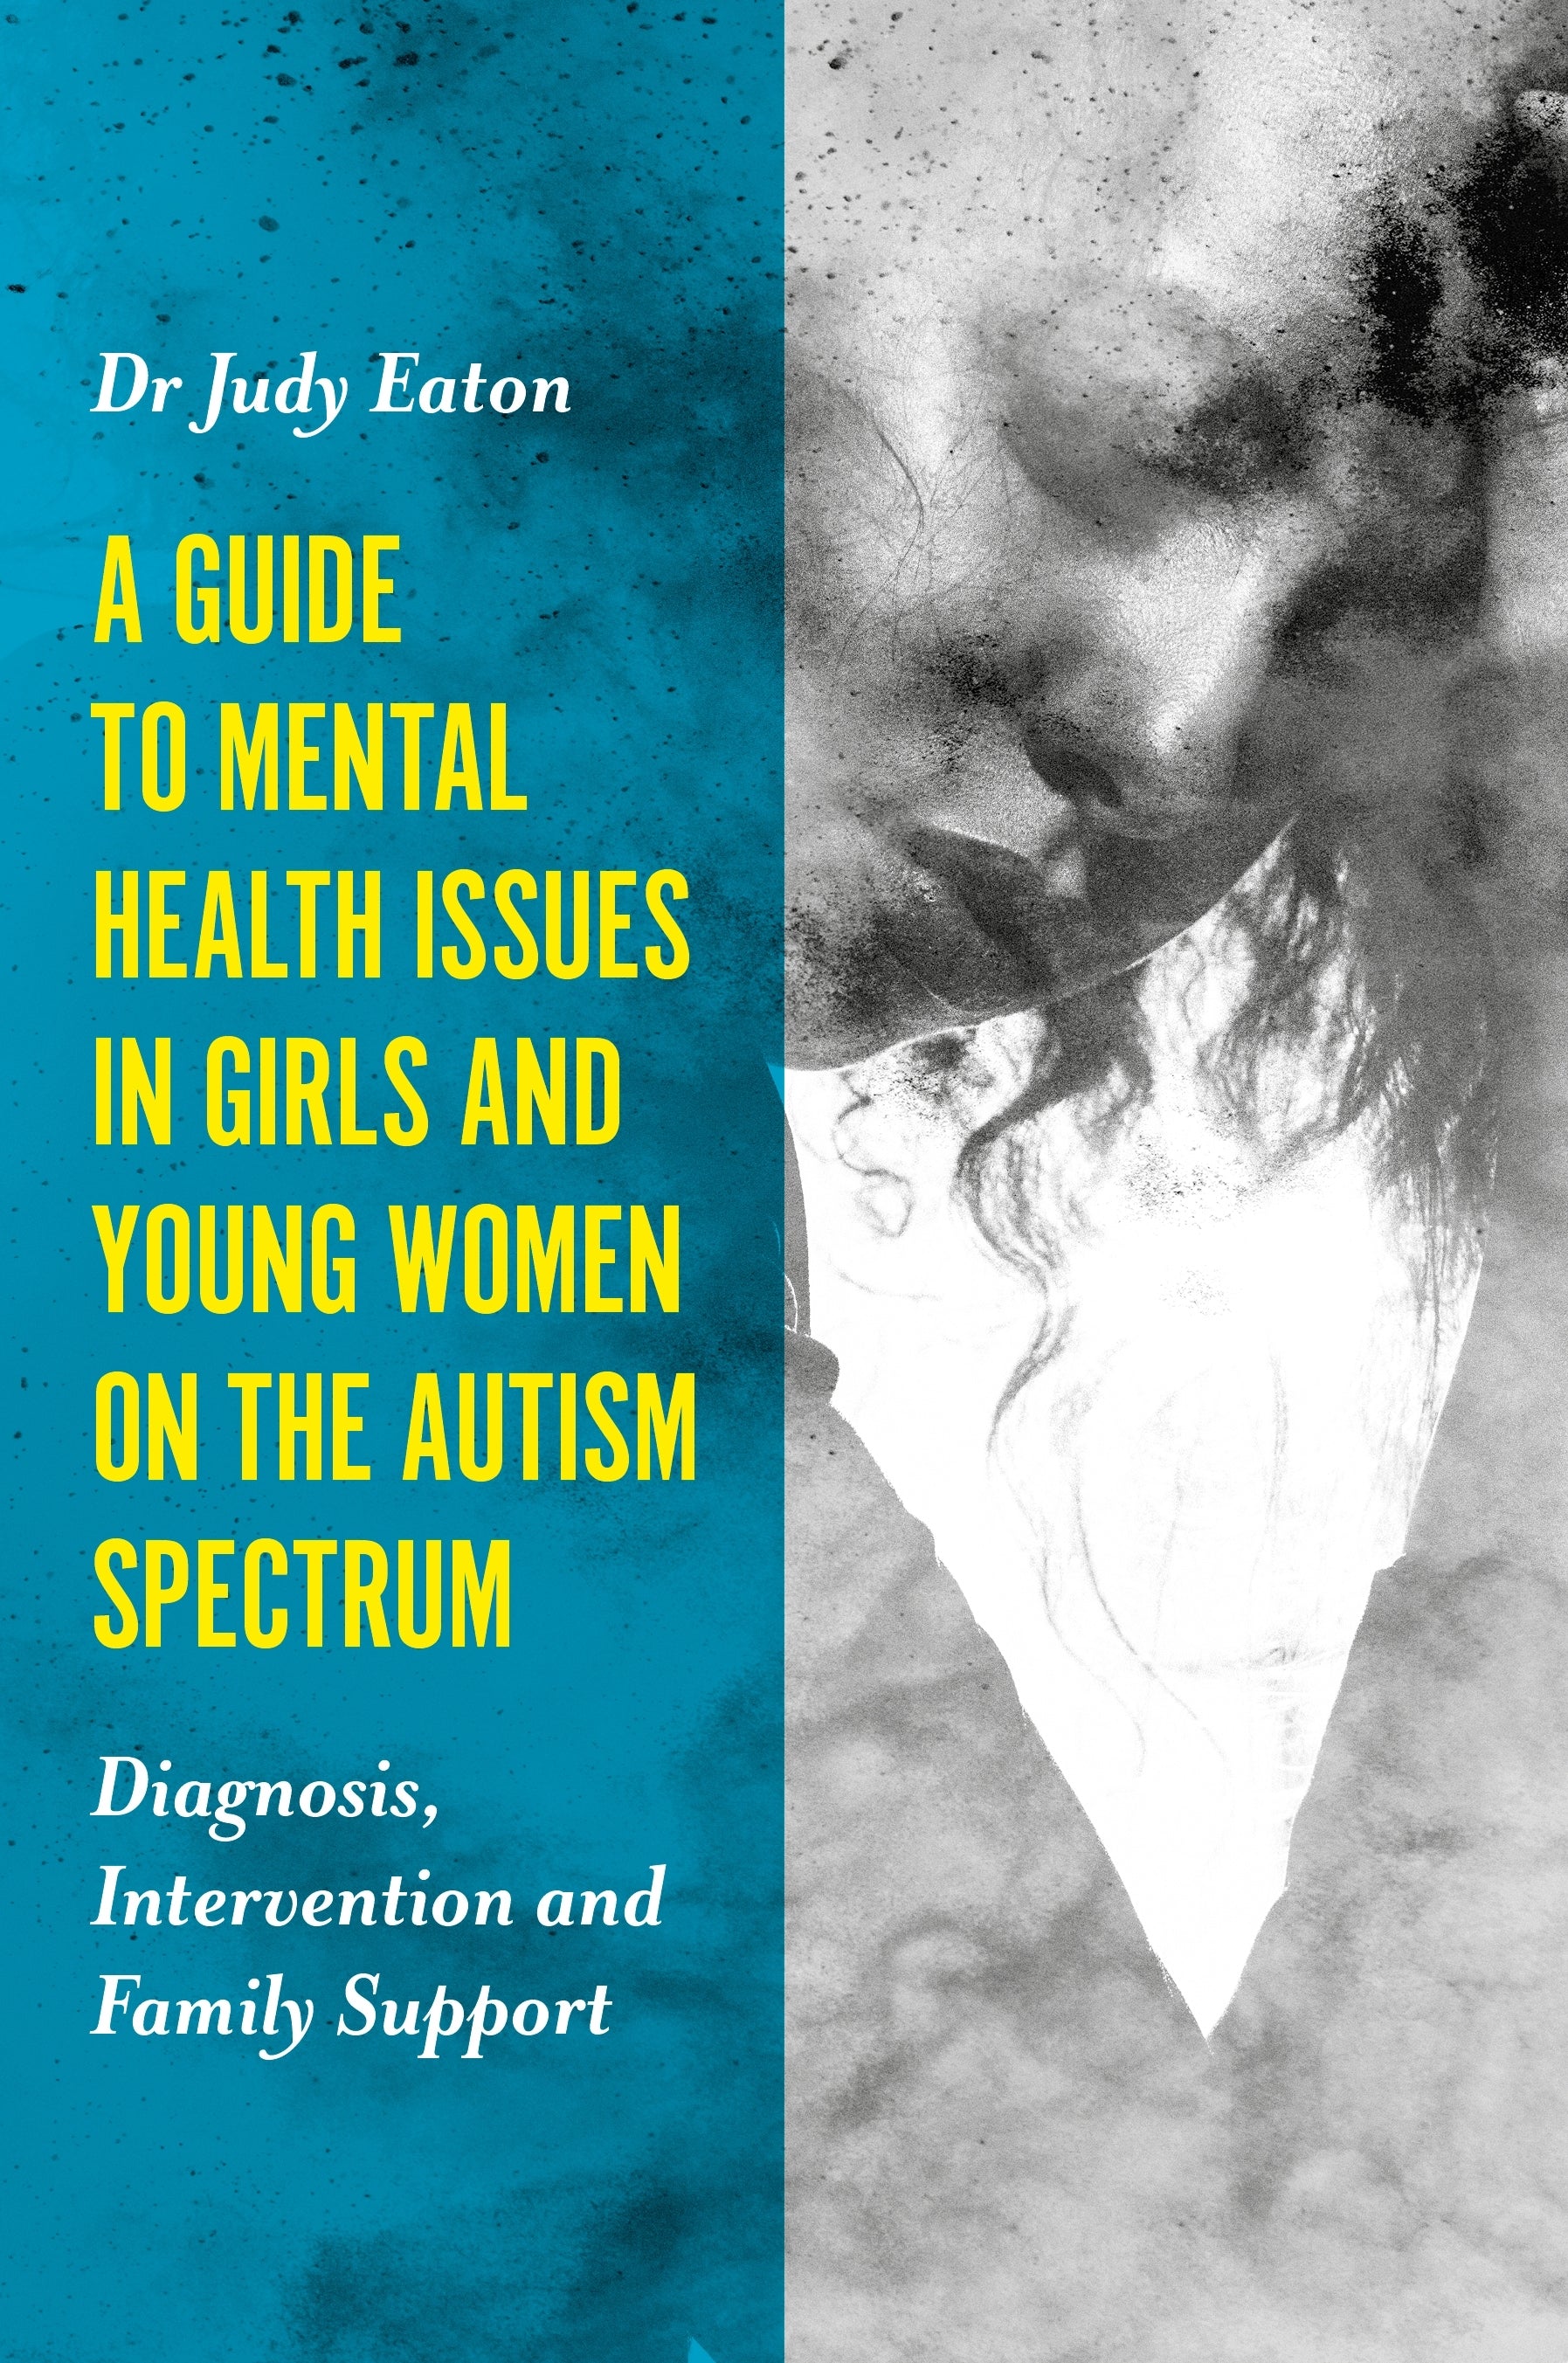 A Guide to Mental Health Issues in Girls and Young Women on the Autism Spectrum by Judy Eaton